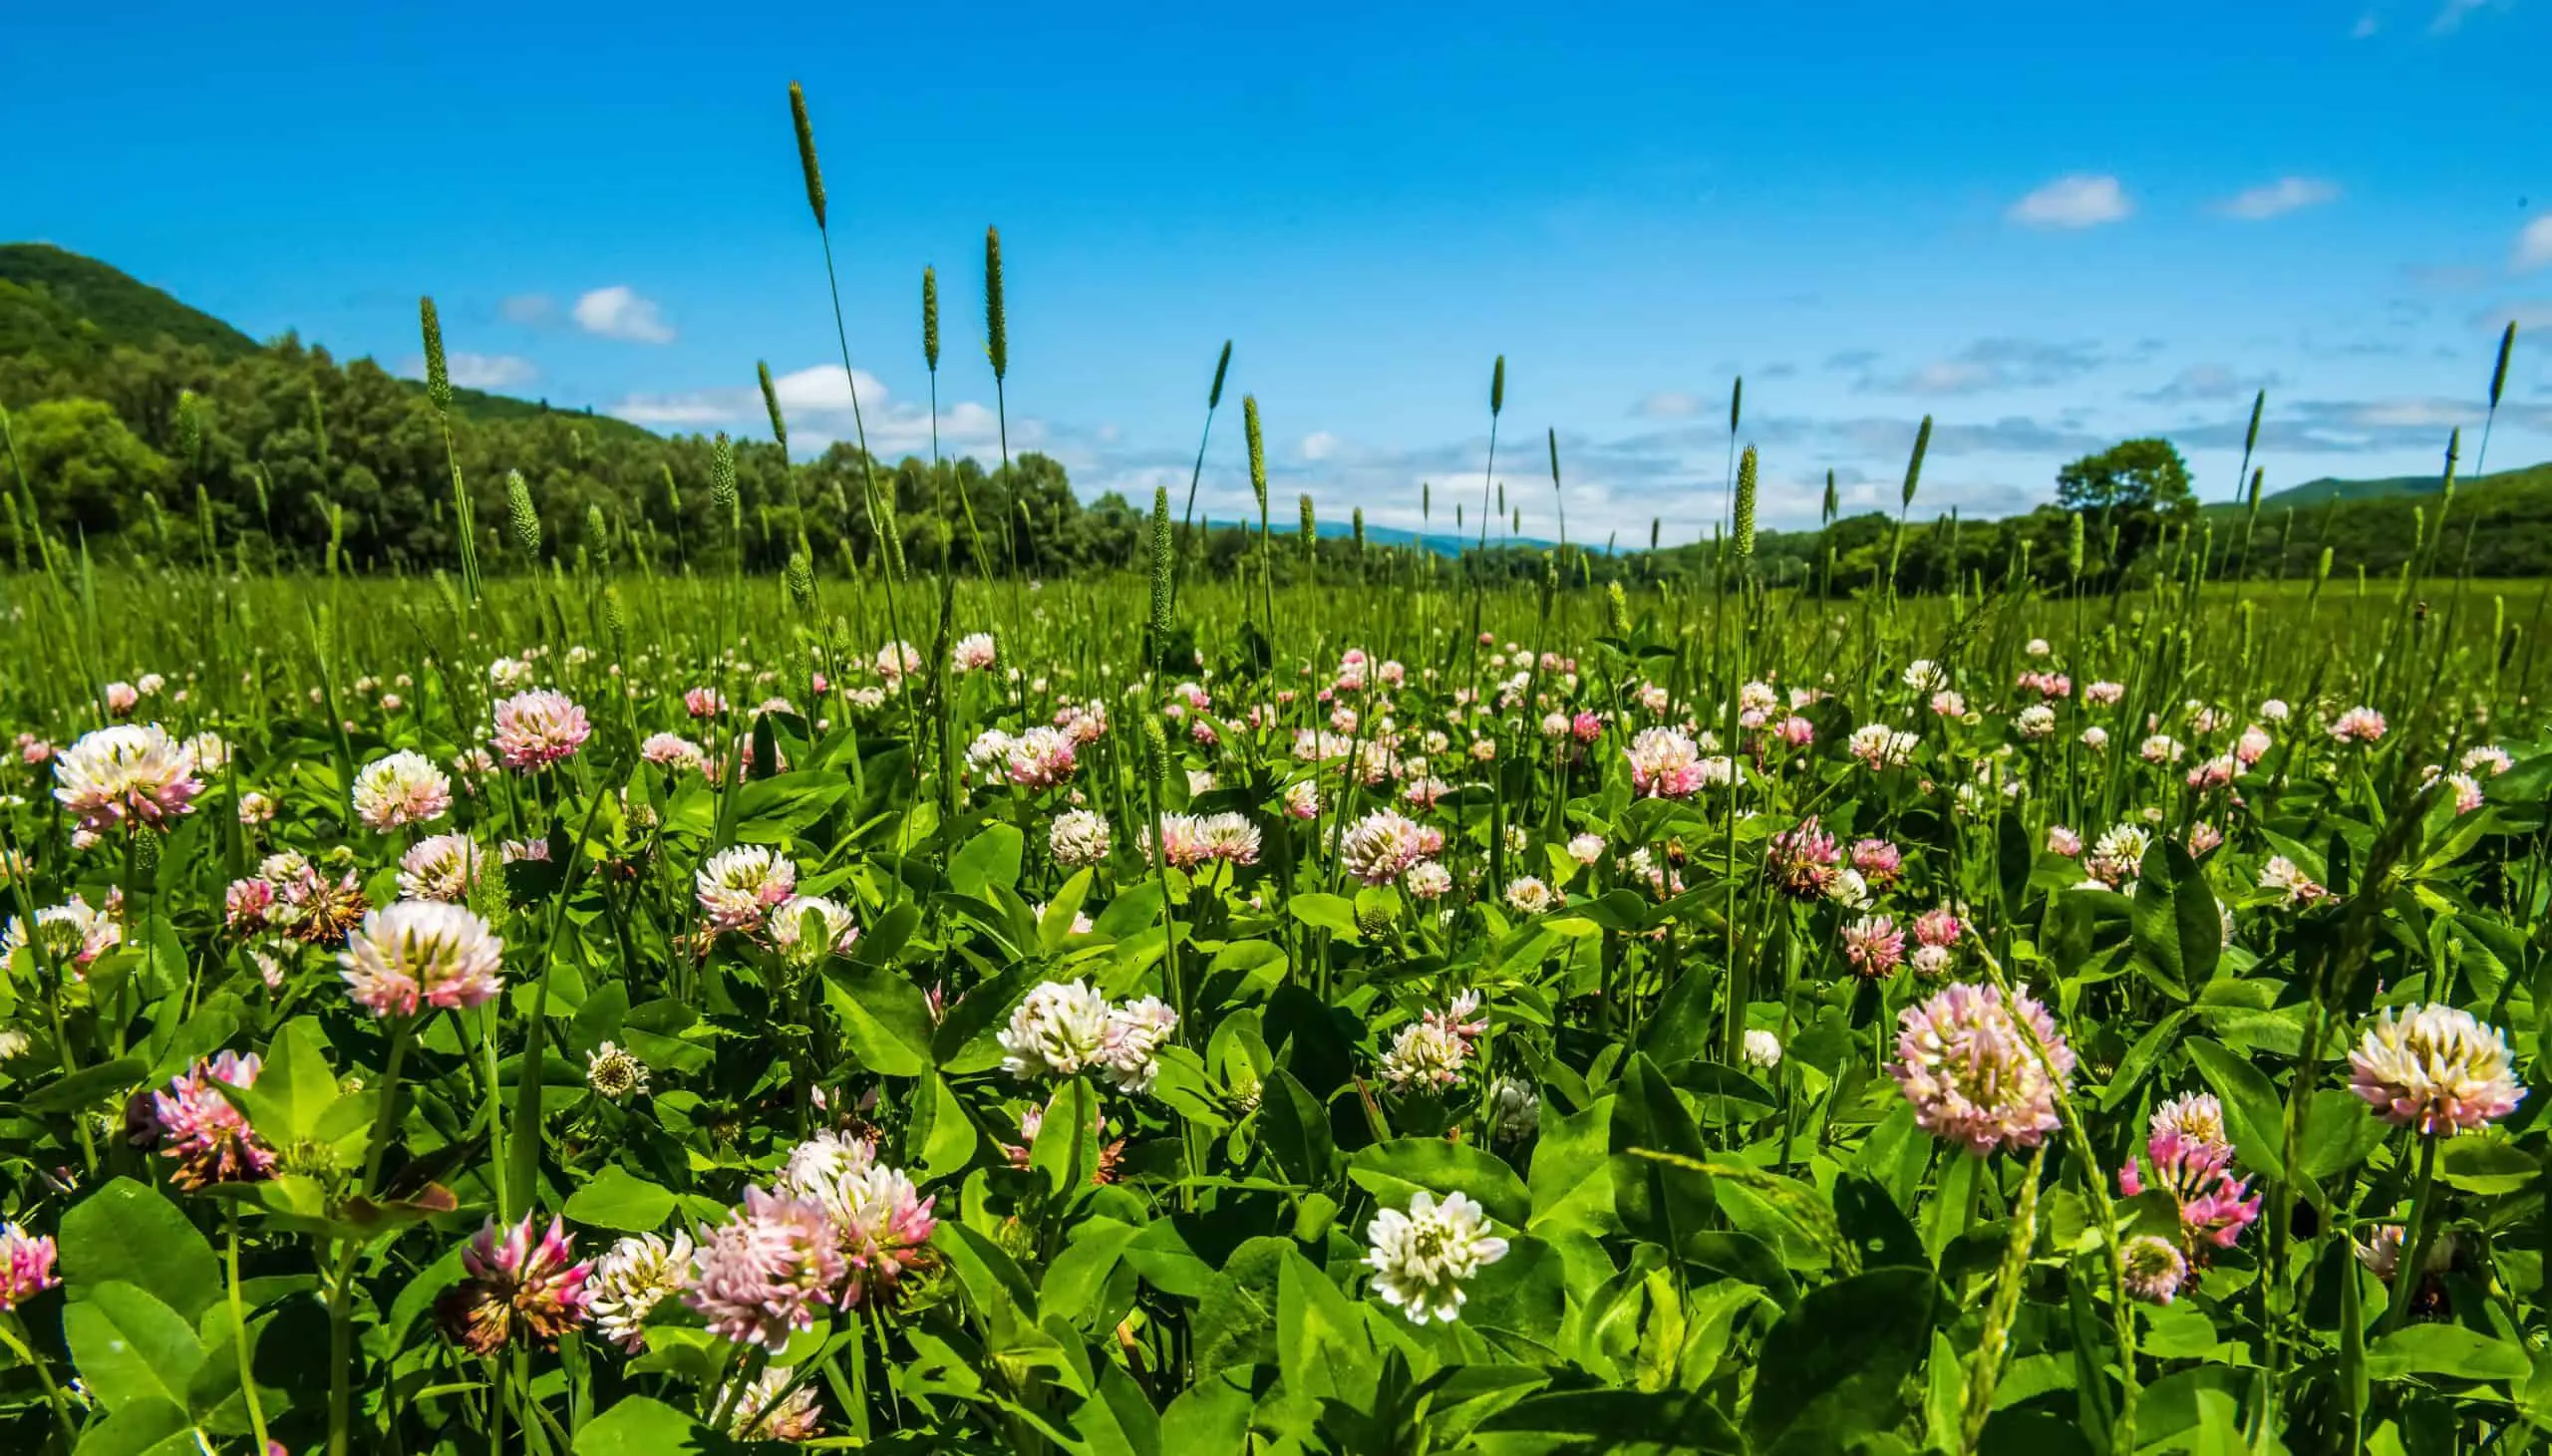 Clover field with flowers in the summer time